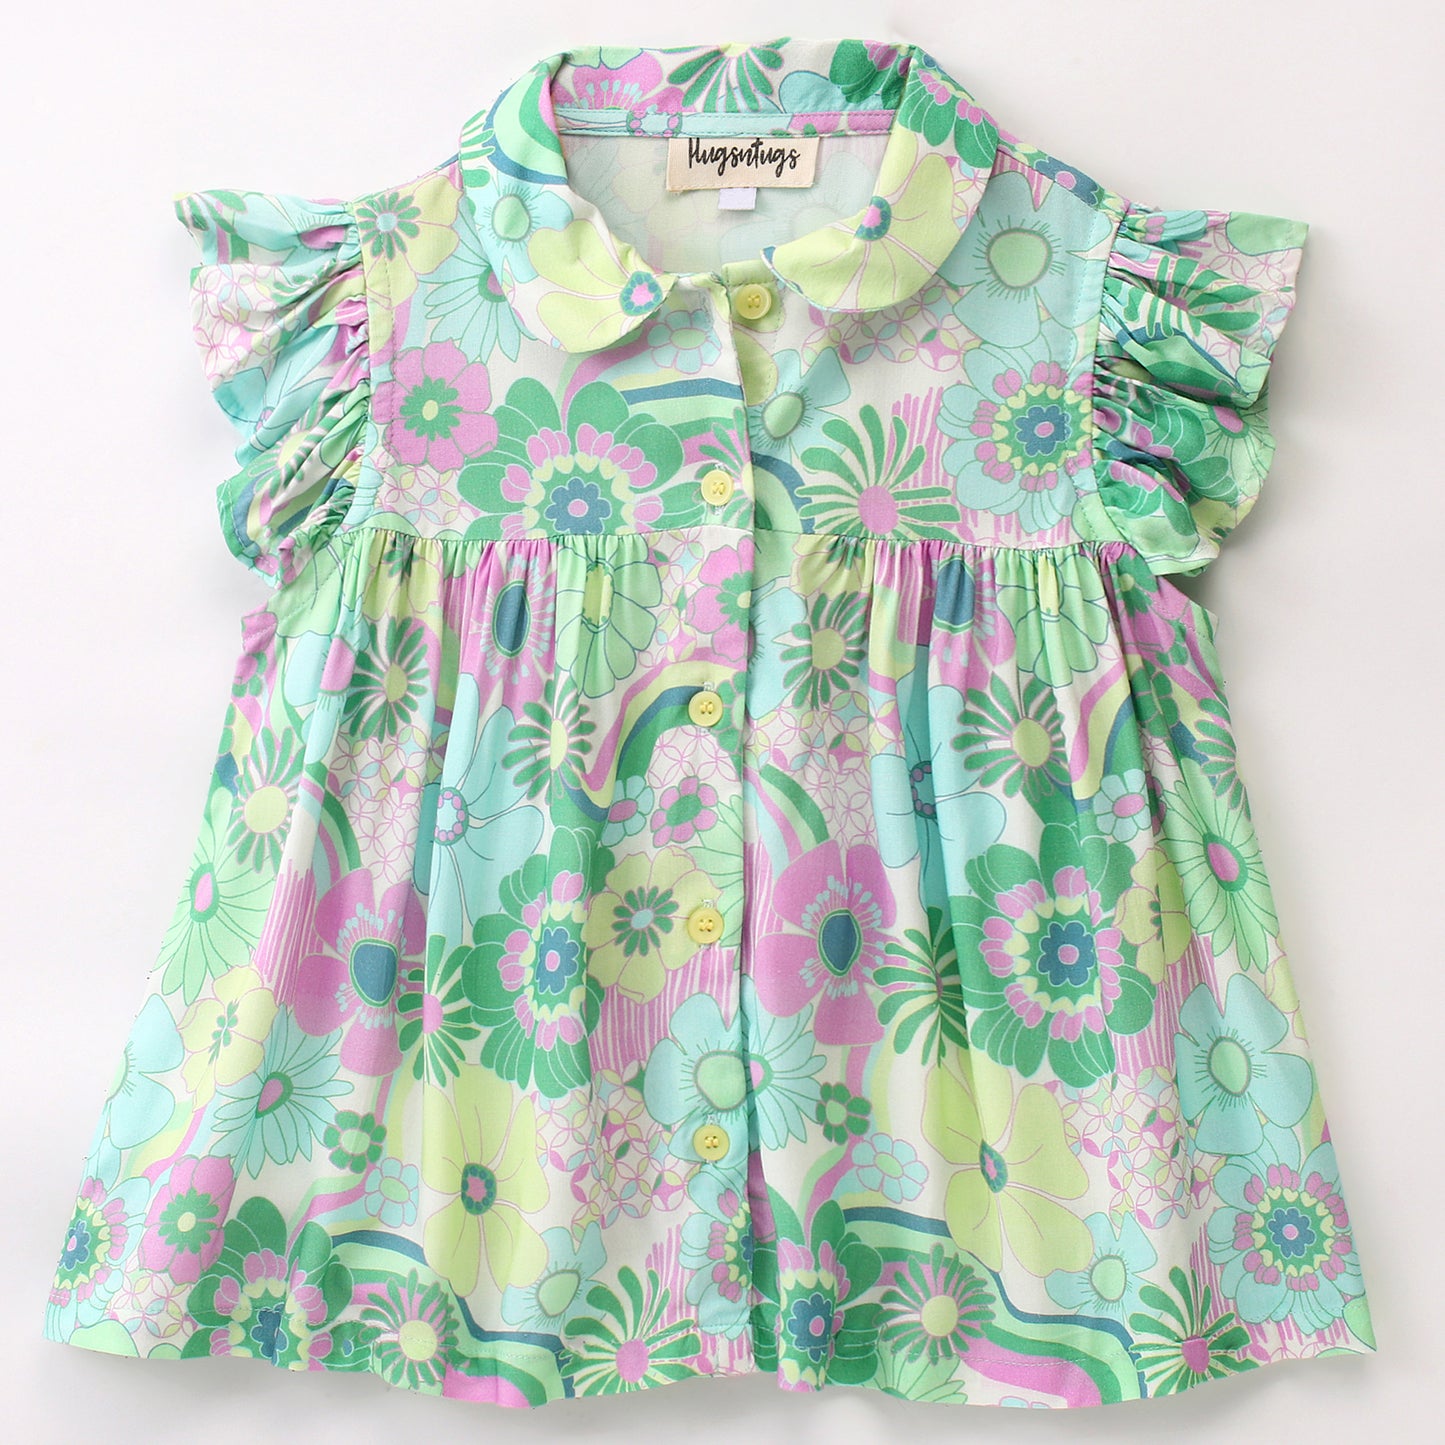 Frill Cap Sleeves Seamless Summer Flowers Printed Shirt Style Top With Frills - Green